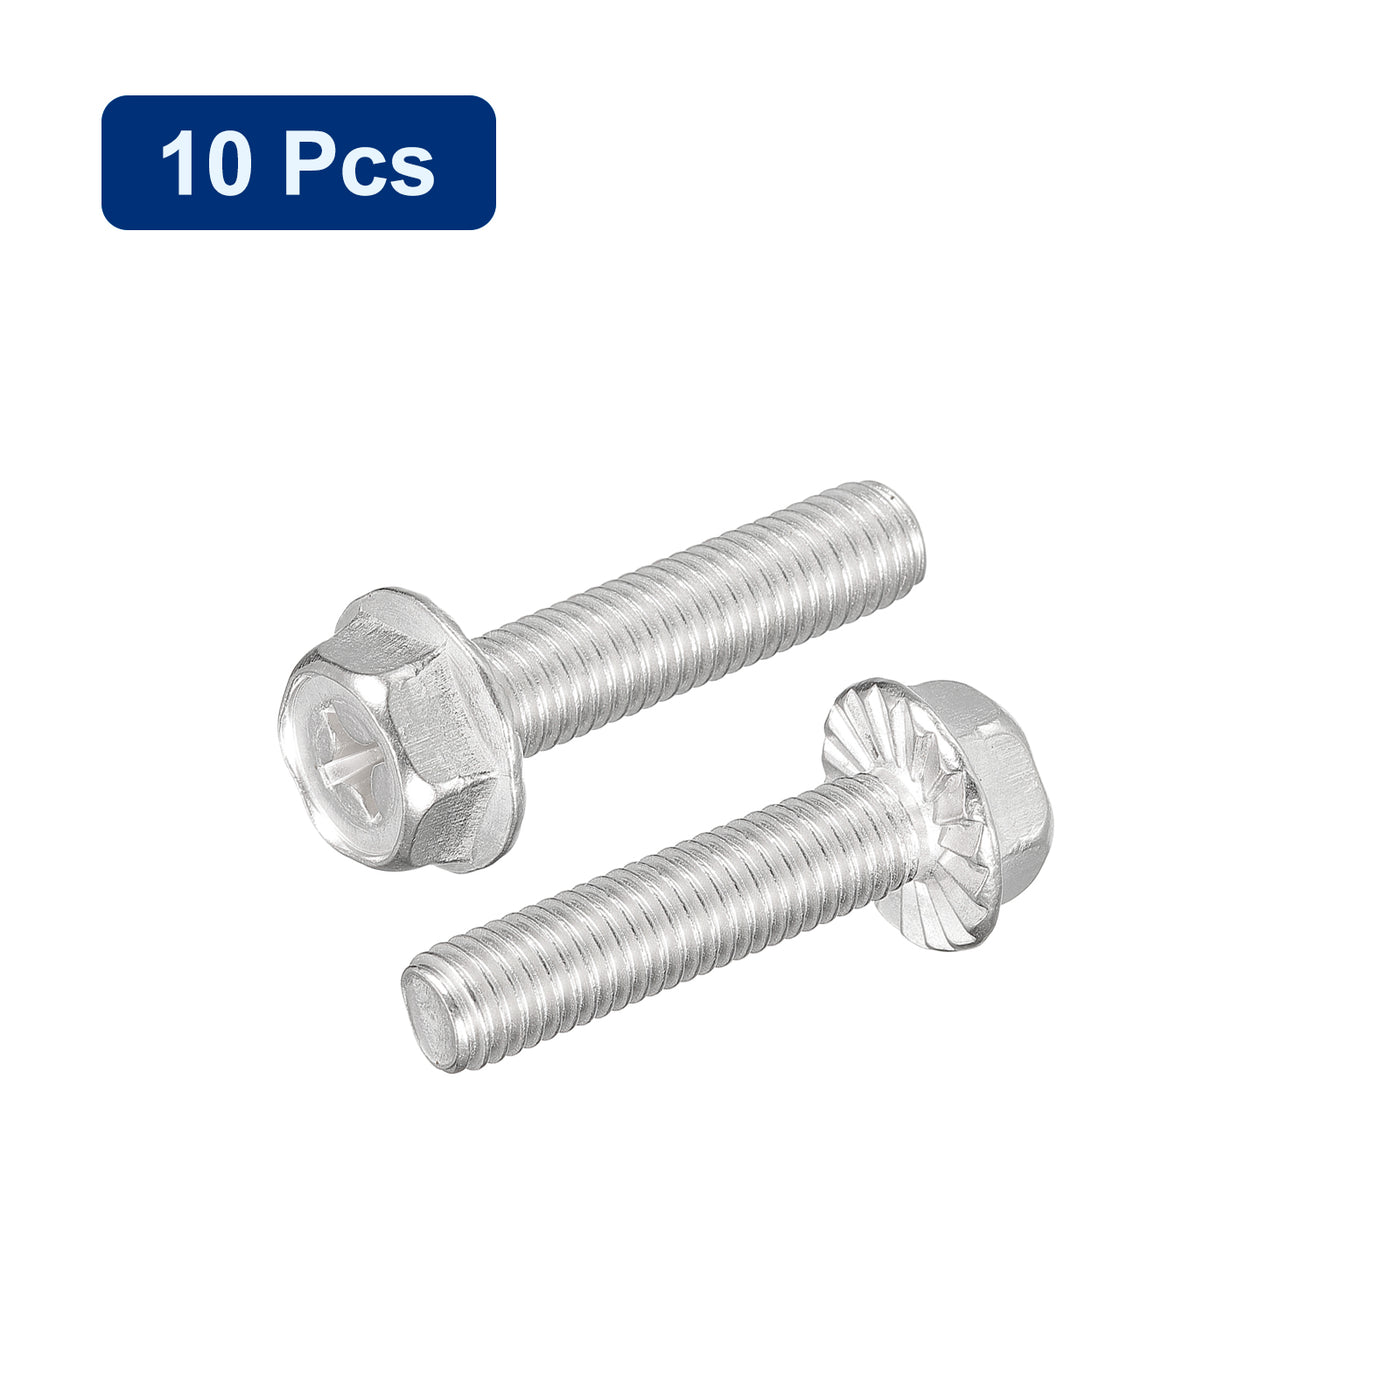 uxcell Uxcell M8x35mm Phillips Hex Head Flange Bolts, 10pcs 304 Stainless Steel Screws